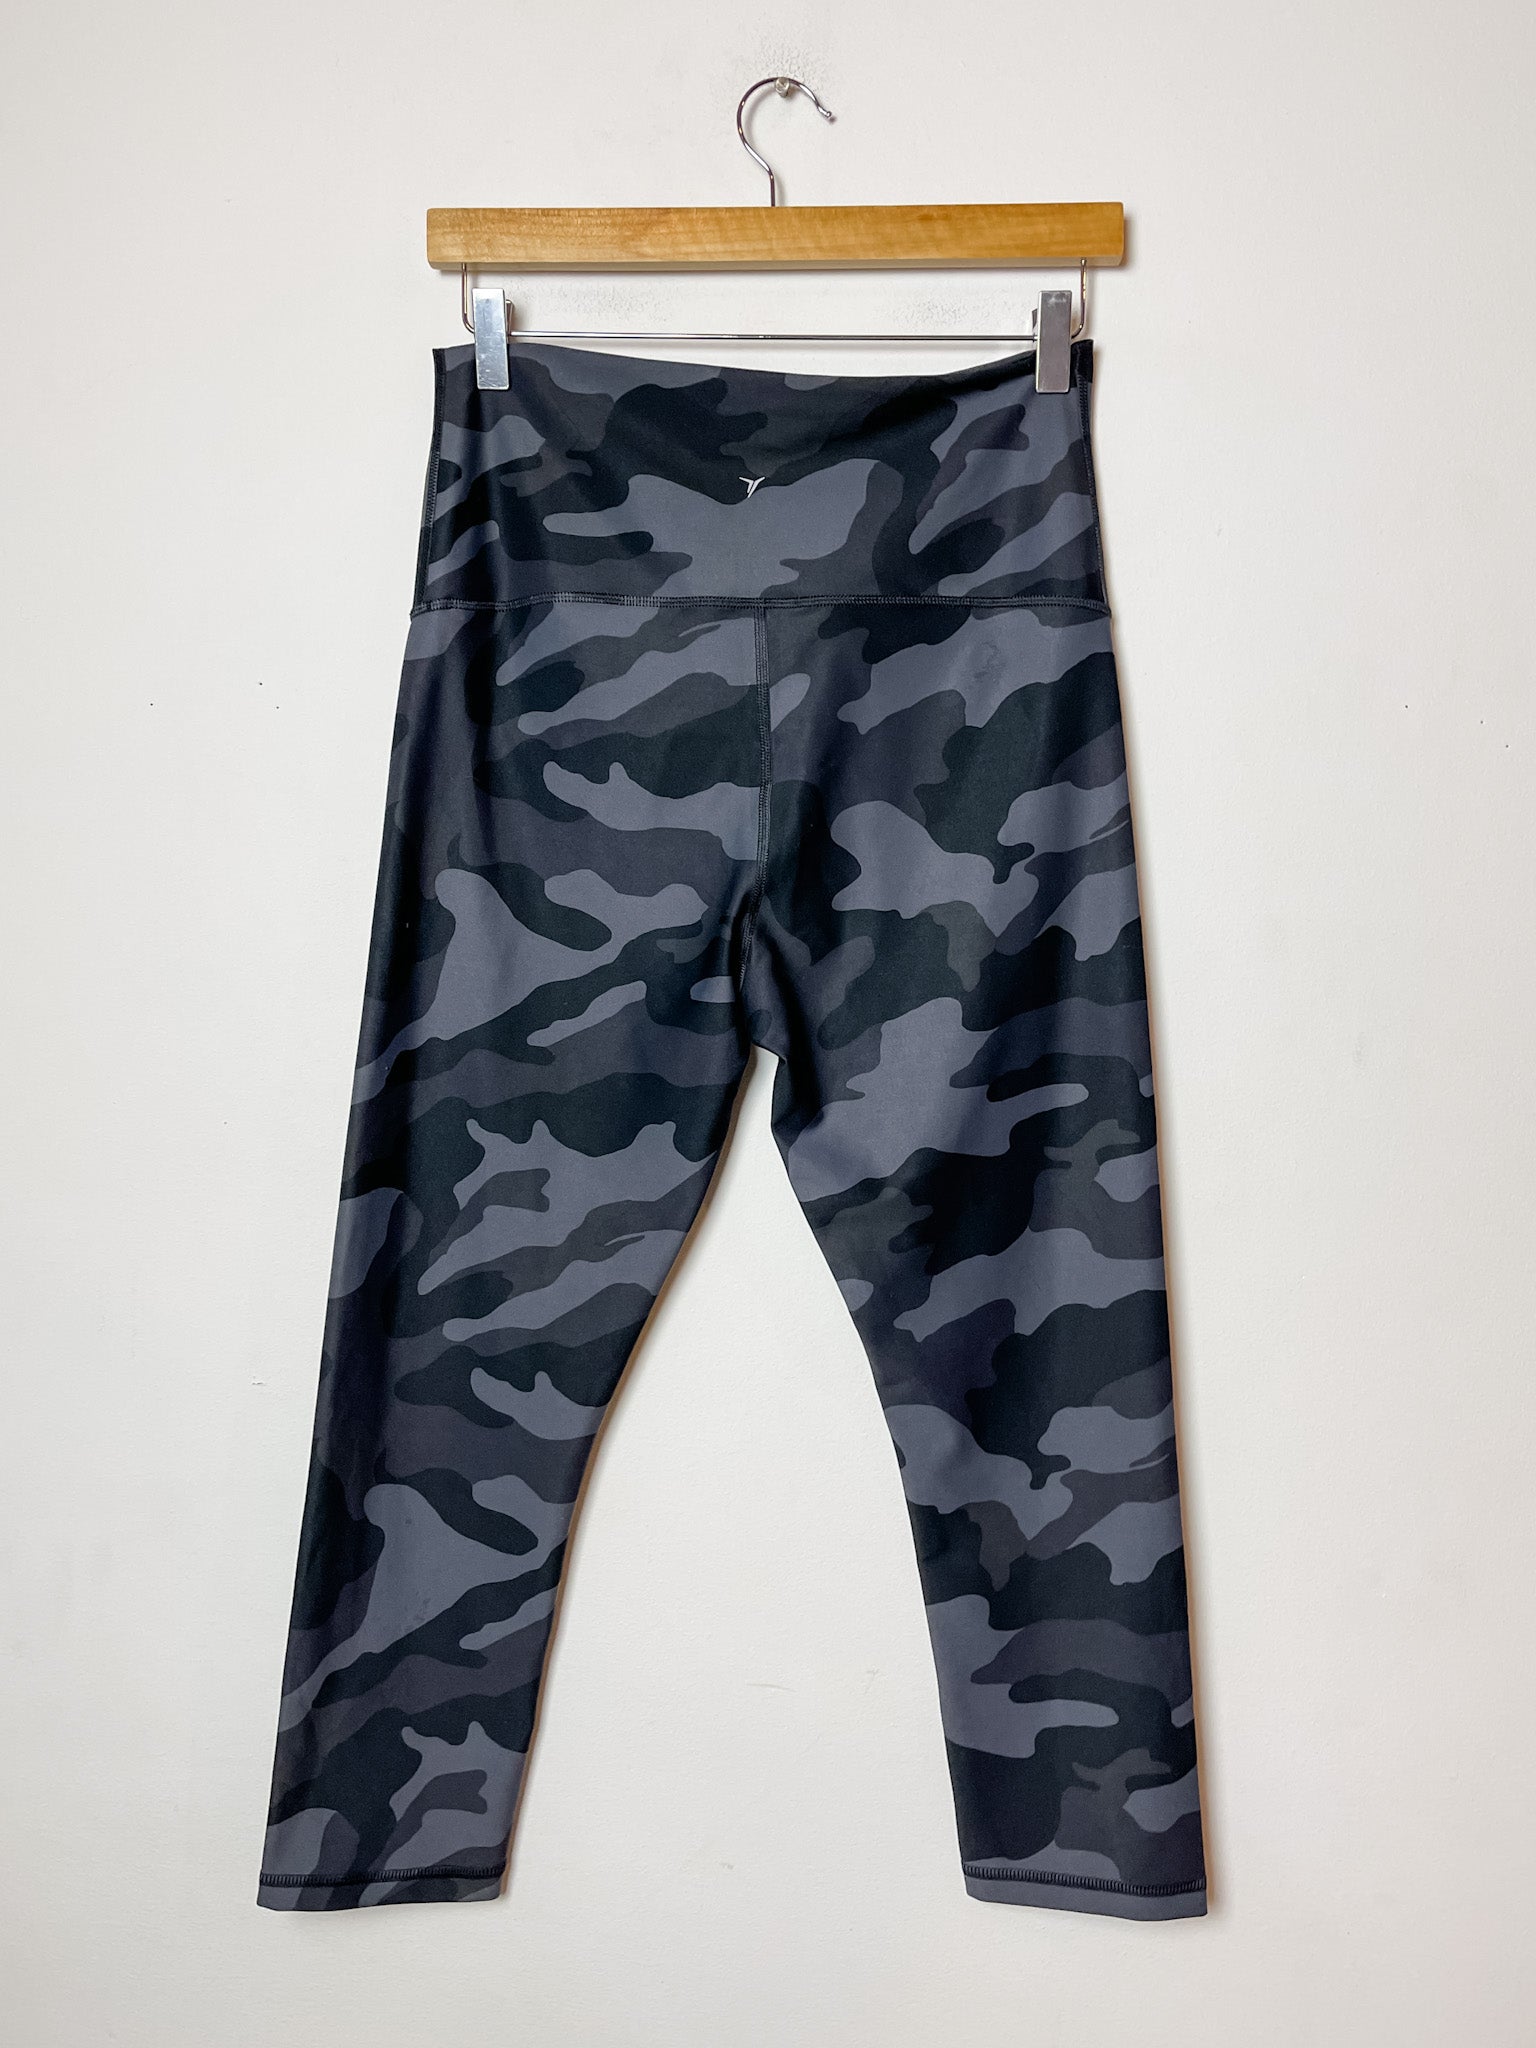 Camo Old Navy Maternity Cropped Leggings Size Small – Jill and Joey